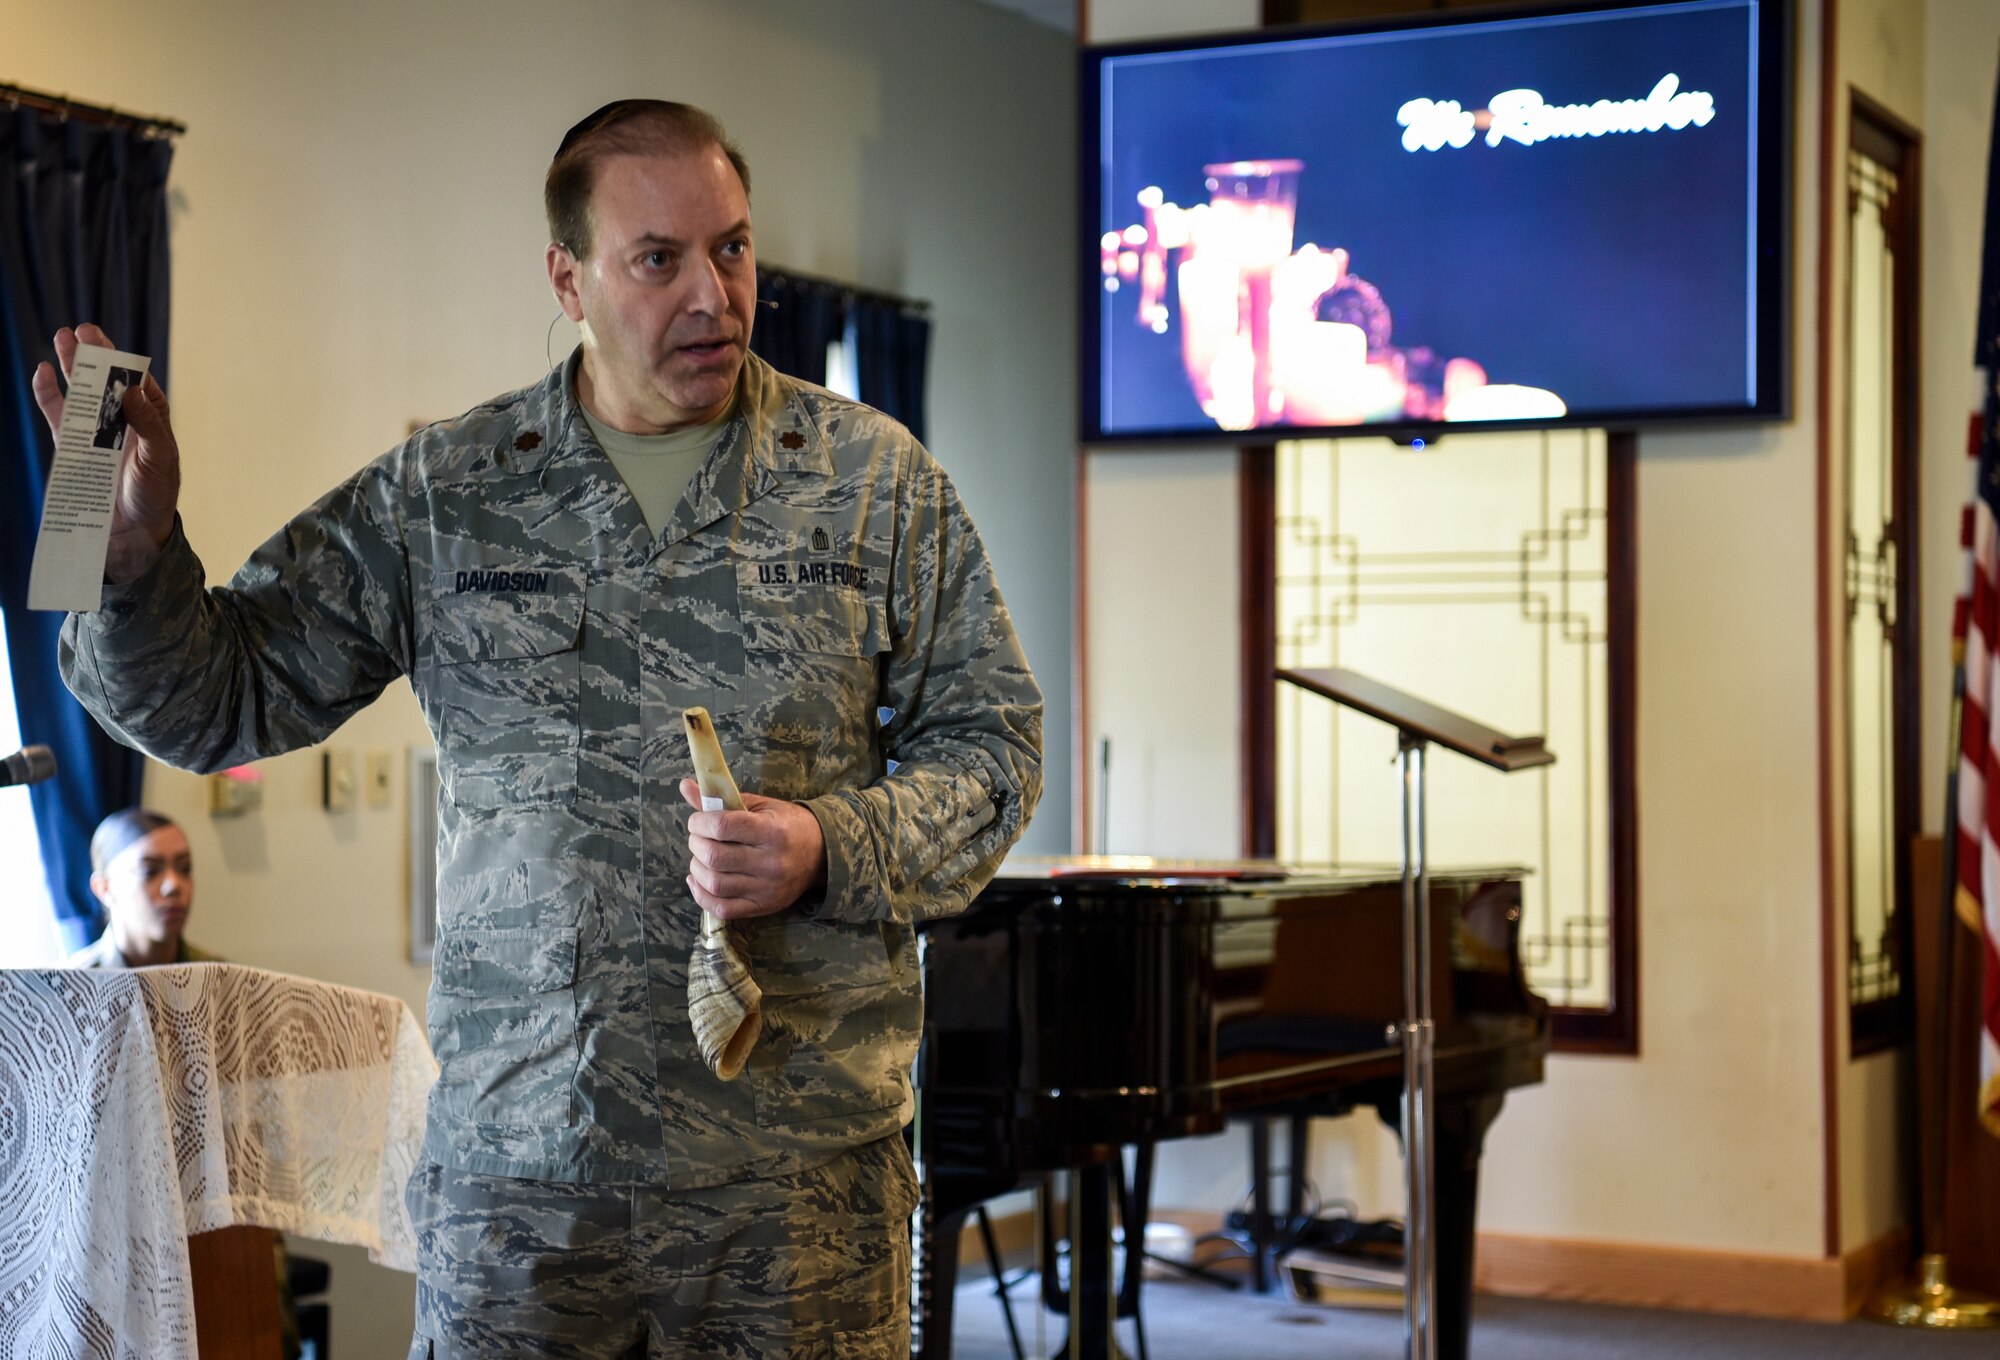 Rabbi (Maj.) Gary Davidson, U.S. Air Force chaplain, speaks during Kunsan Air Base’s Holocaust Remembrance Ceremony at the Base Chapel on May 2, 2019. Davidson served as the ceremony’s keynote speaker. He closed his speech by blowing a shofar, an ancient musical horn made of a ram’s horn, as a sign of inspiration, humanity, and strength in the Jewish religion. (U.S. Air Force photo by Capt. Remoshay Nelson)